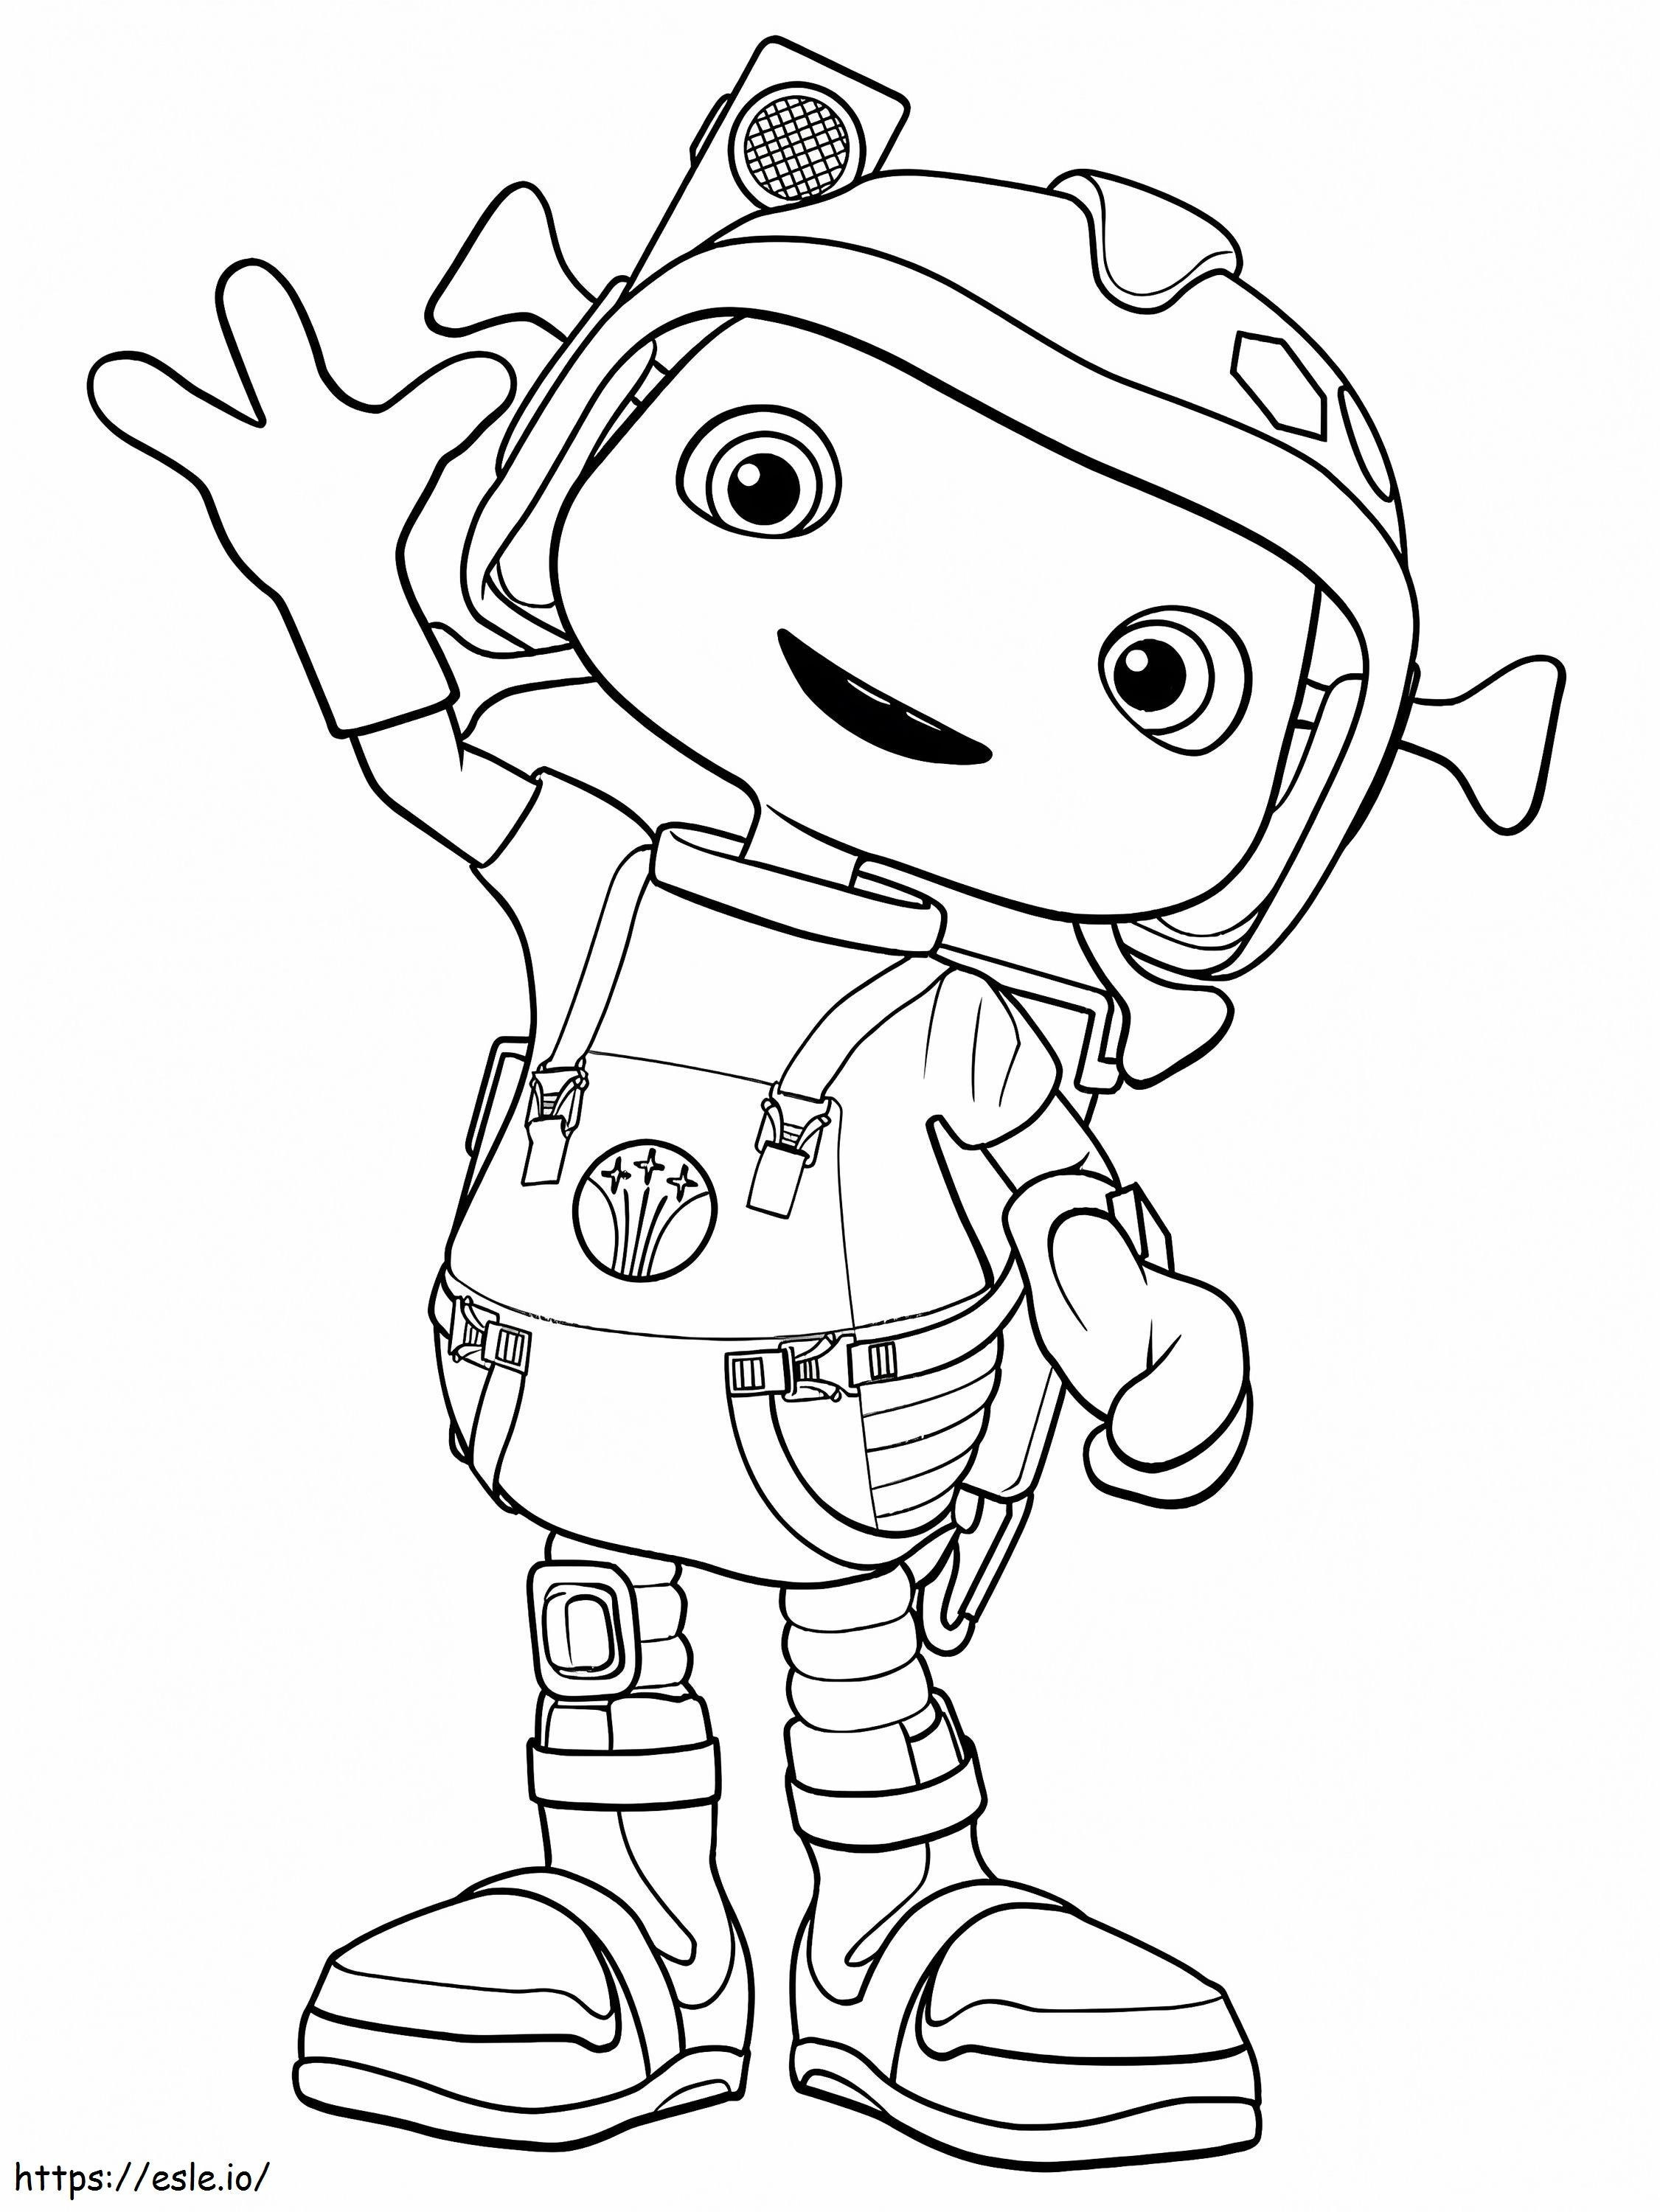 1586571383 Untitled845 coloring page